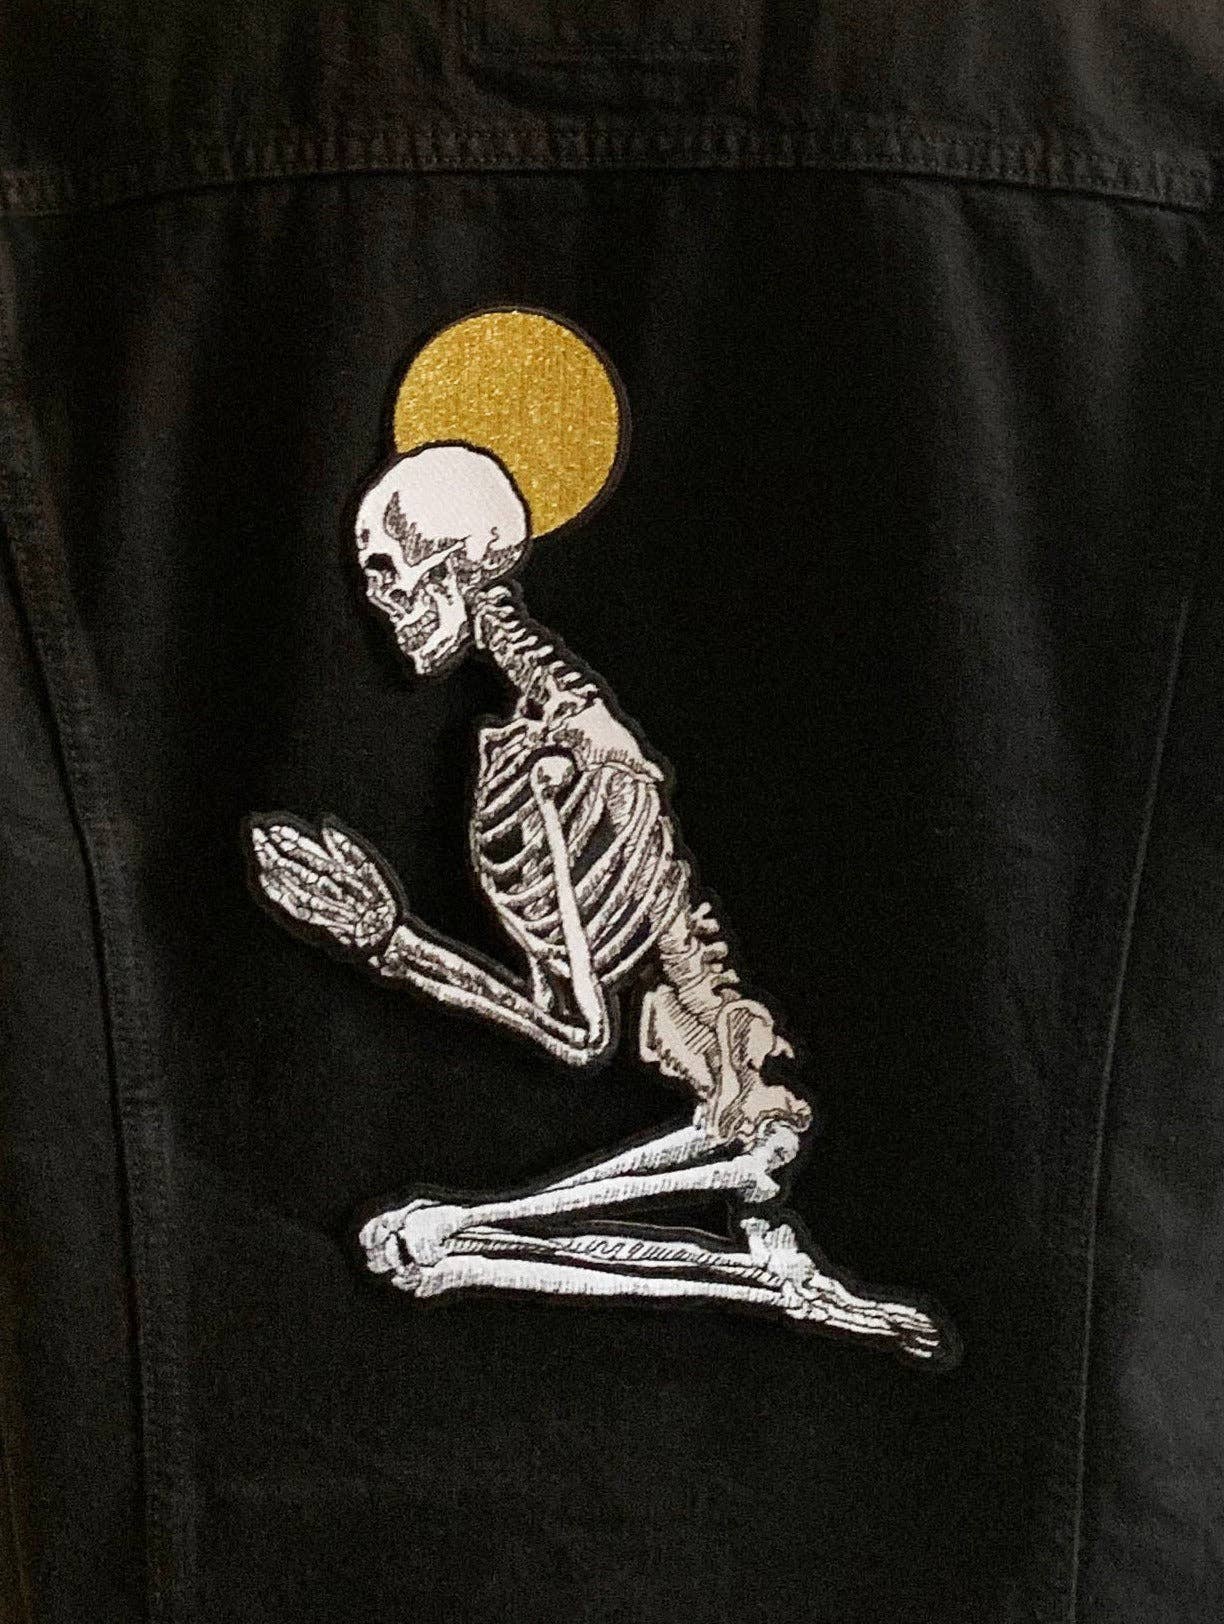 Large Embroidered Back Patch - "The Prayer"